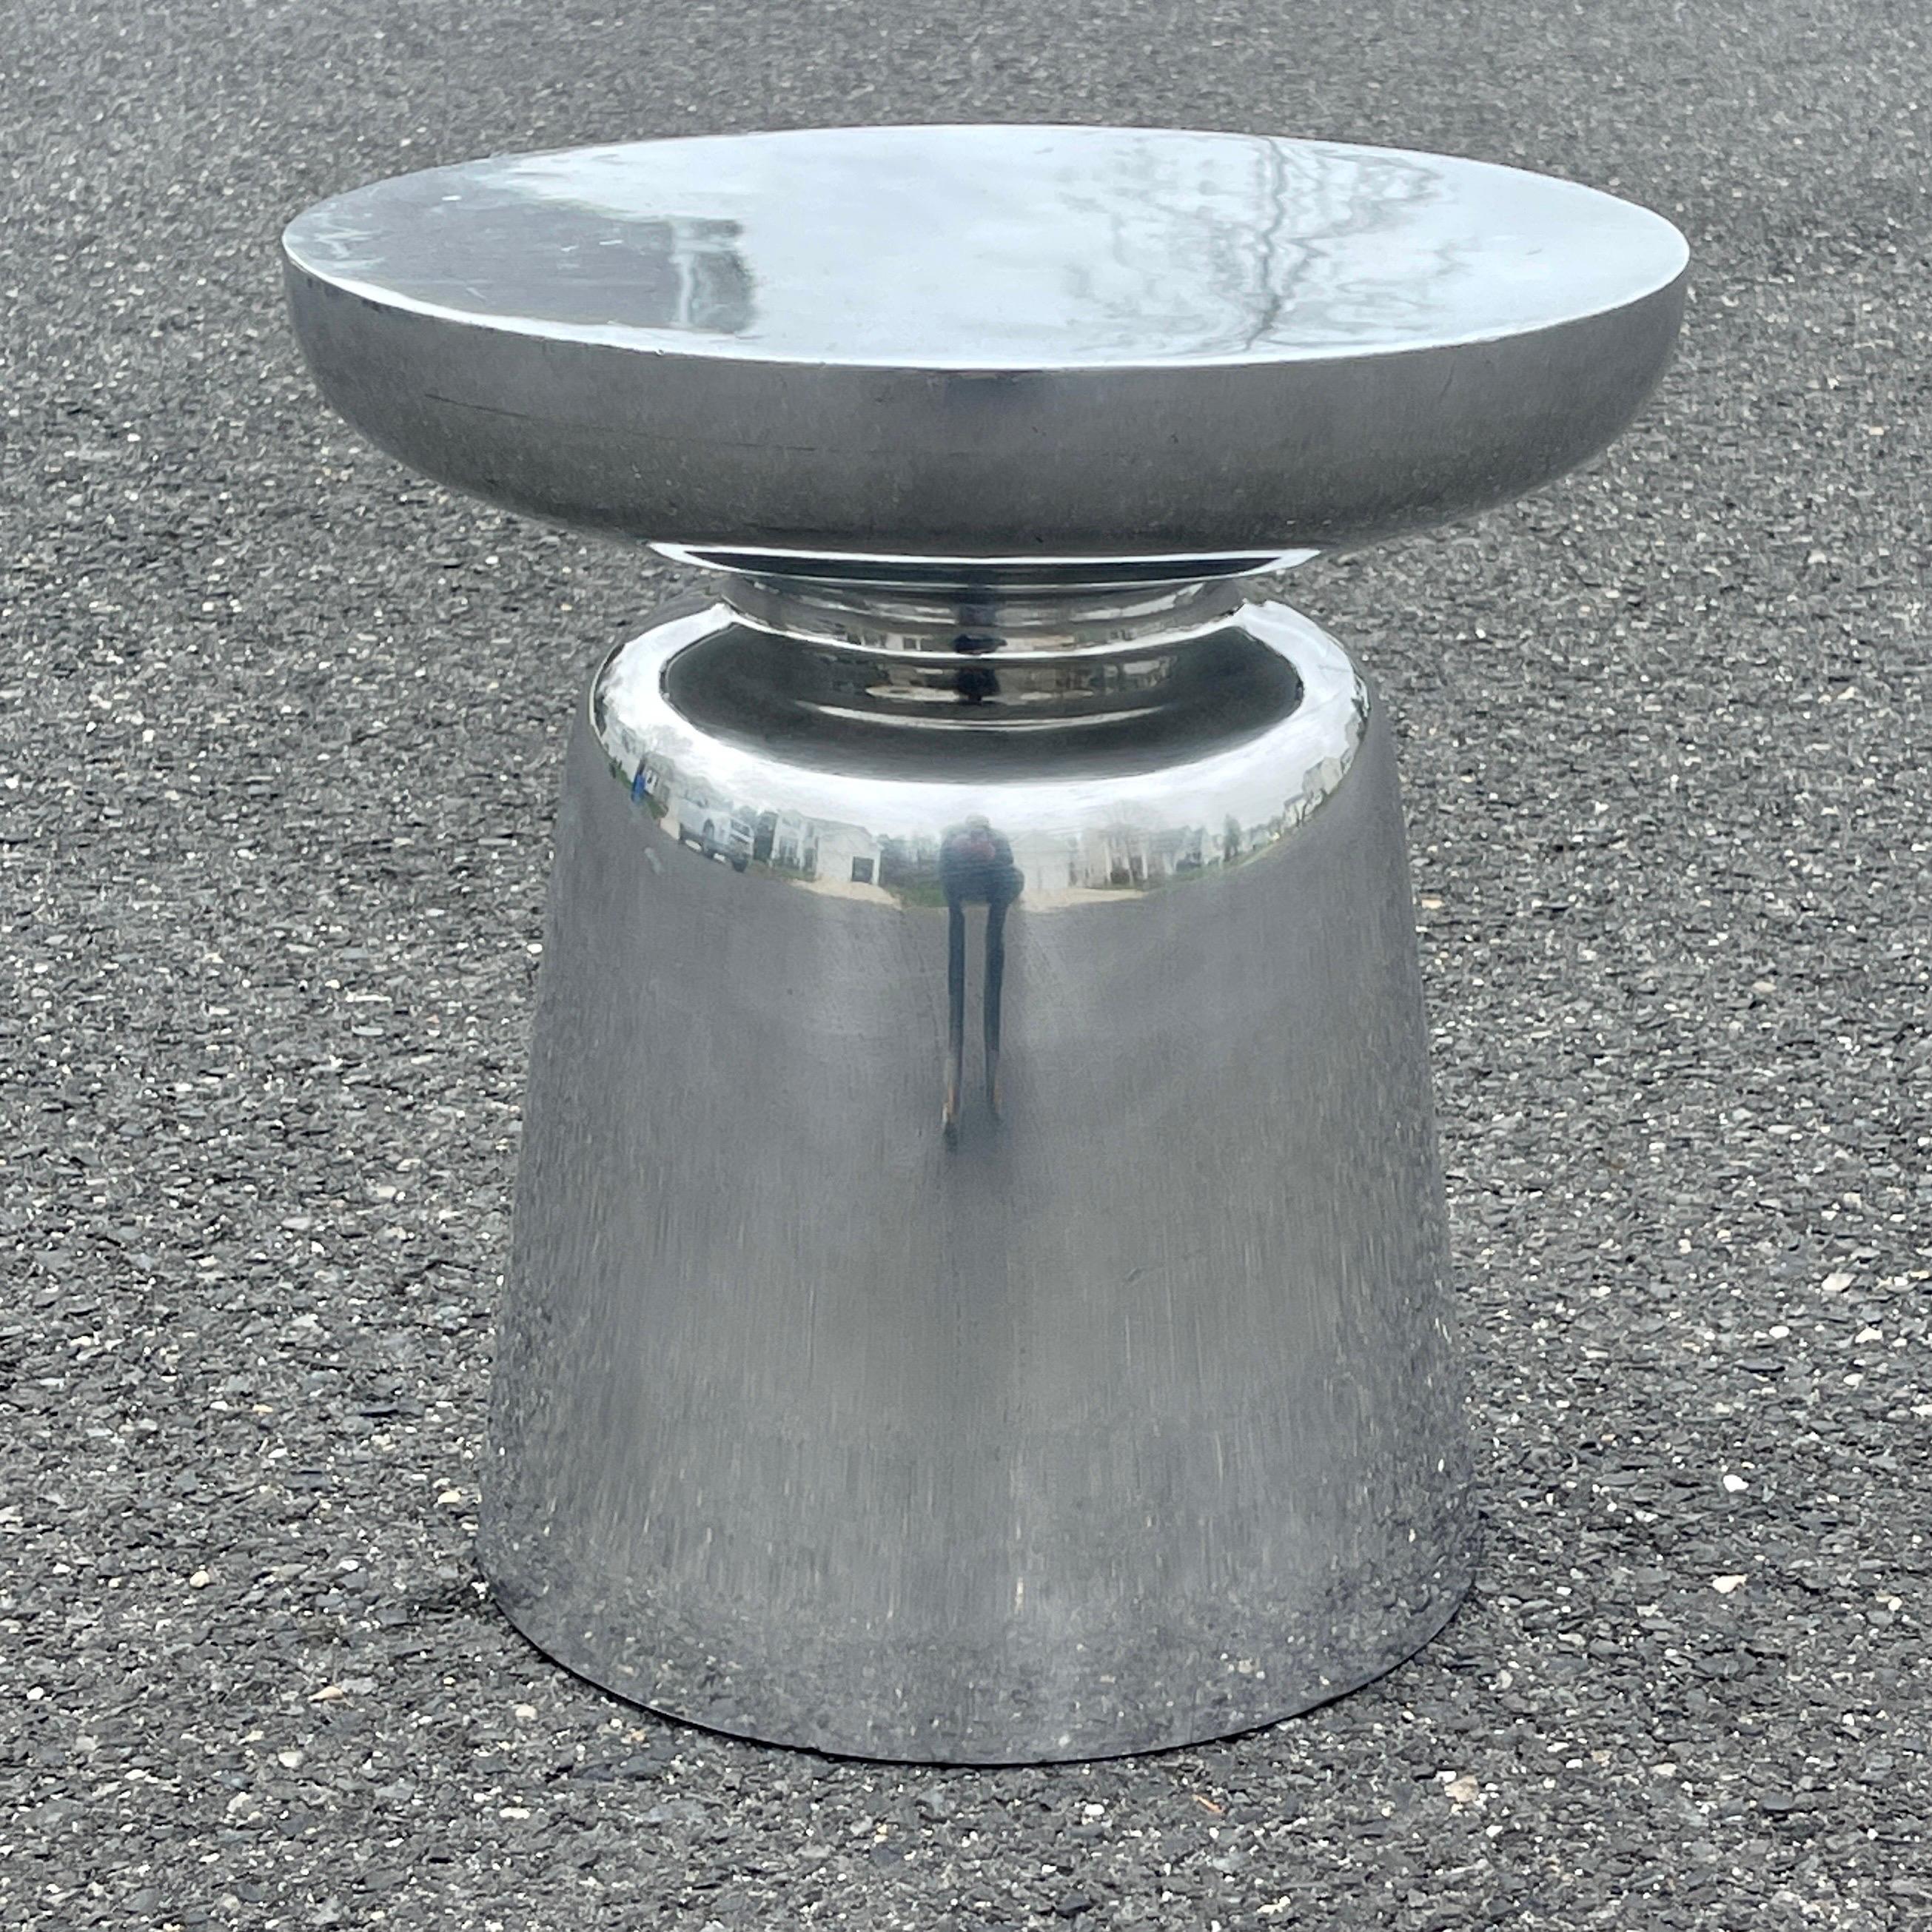 Mid-Century Modern hourglass table or pedestal in thick aluminum plate.
3/16 inch thick aluminum plate with a rough industrial finish.